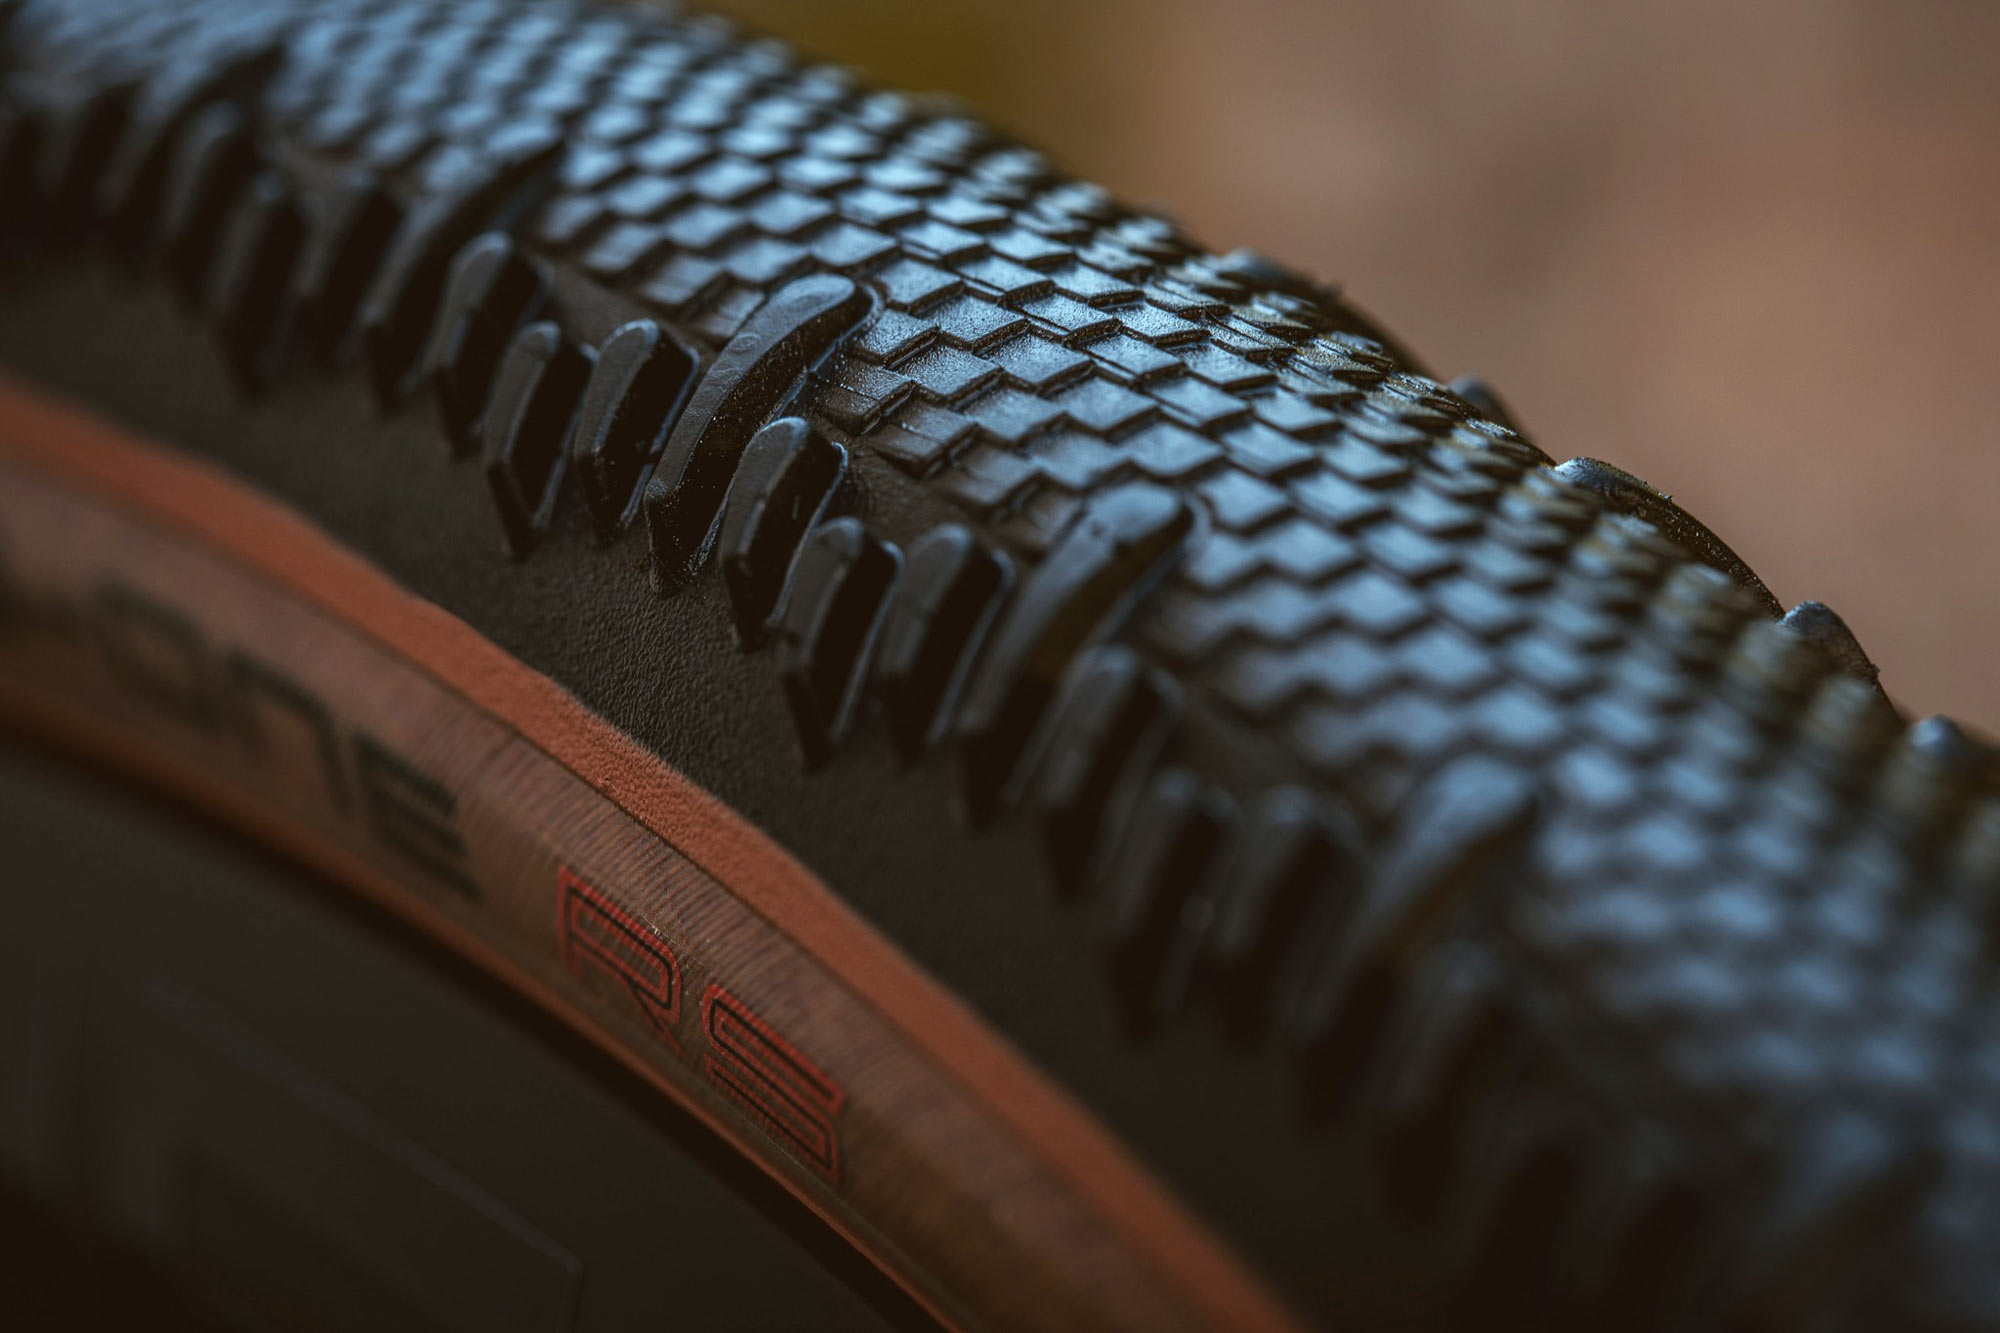 Schwalbe G-One RS gravel racing tire is 20% percent faster, less rolling-resistance, file-tread